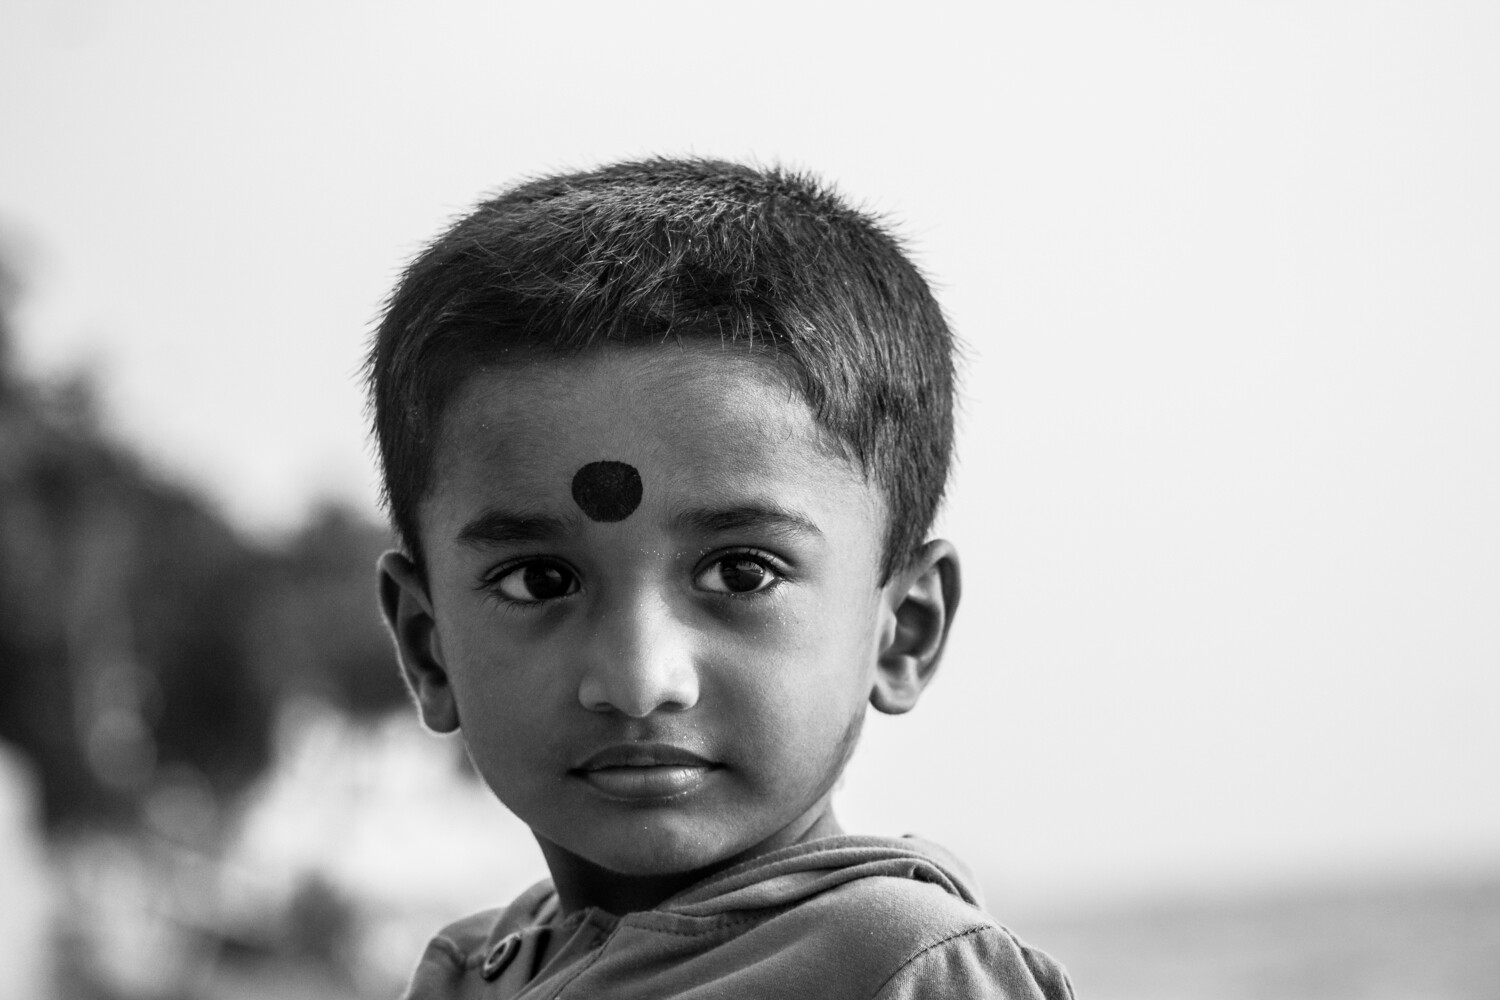 The young with the Bindi